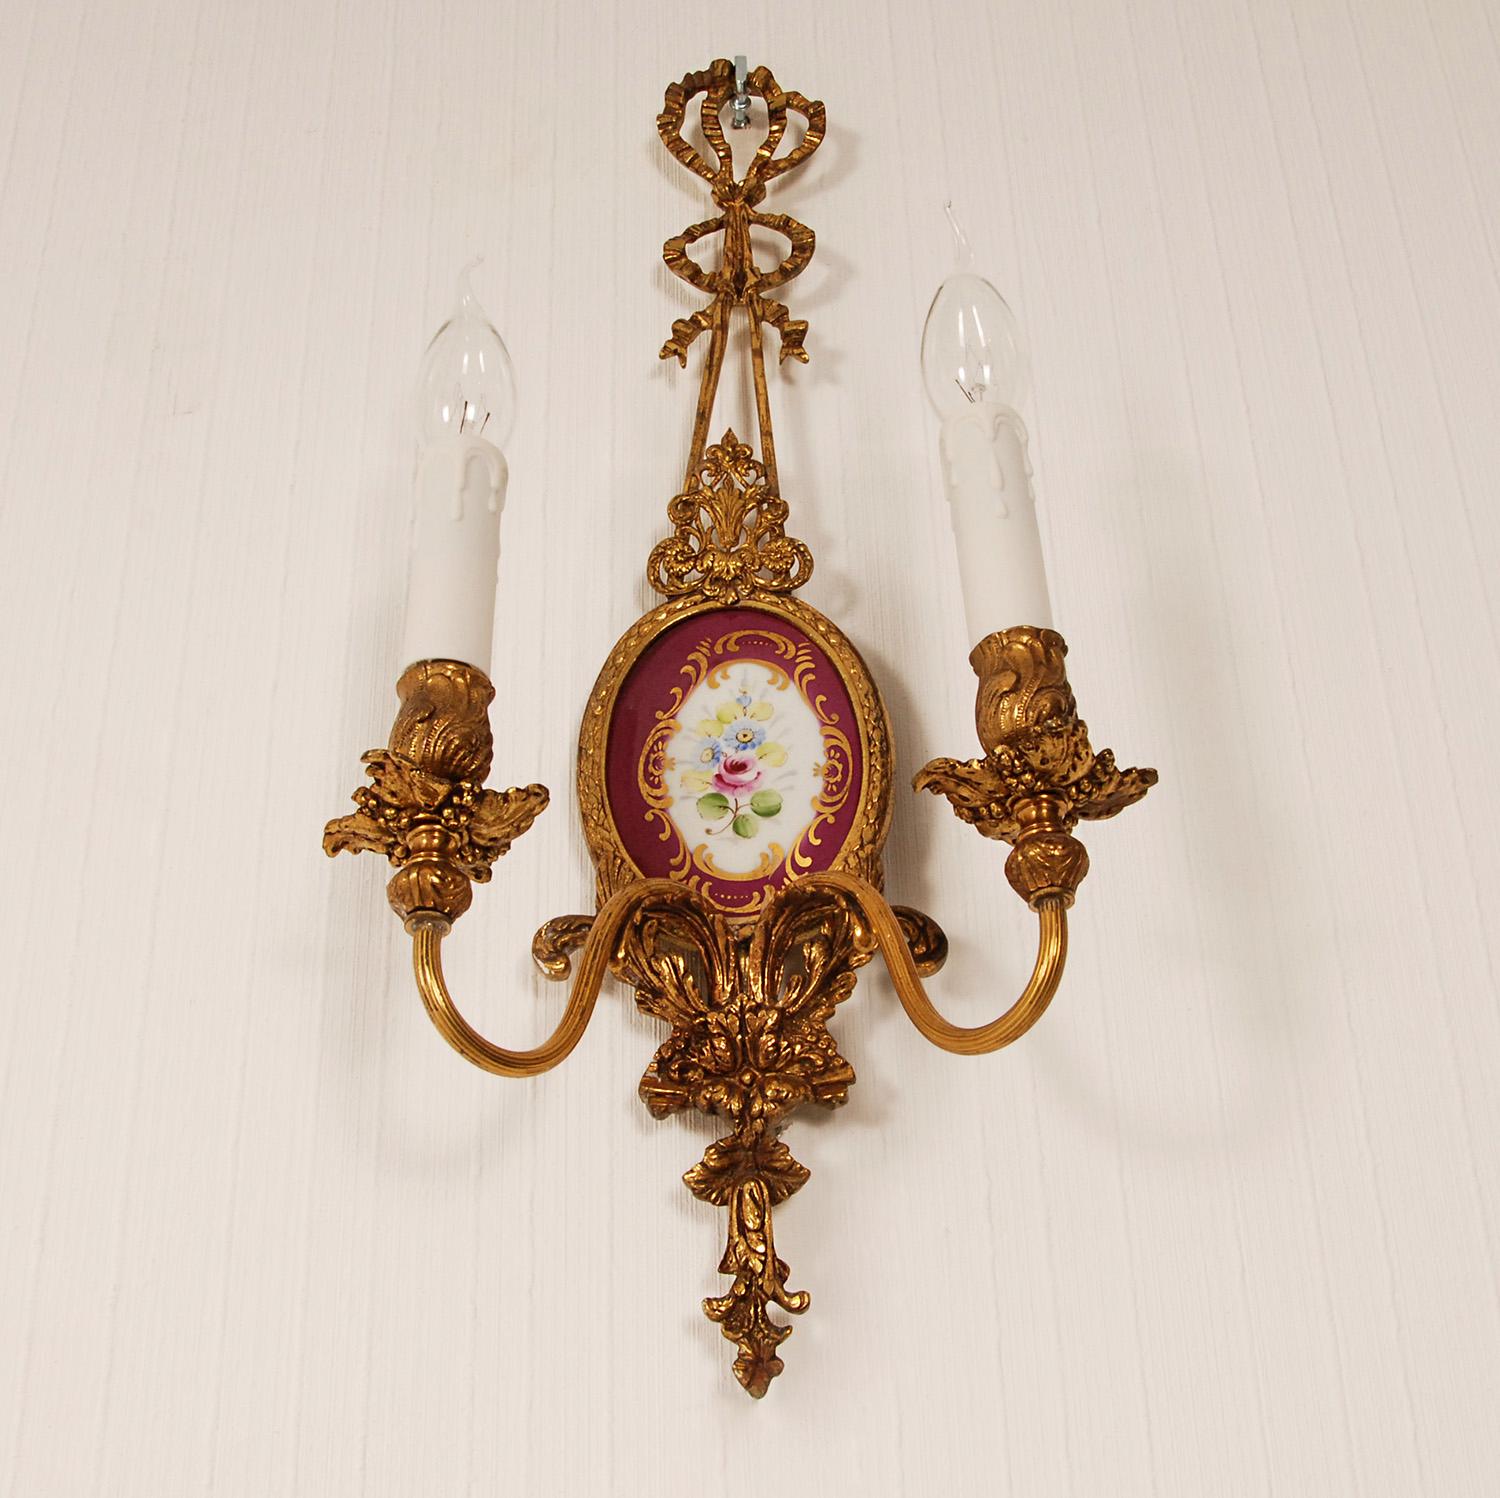 A pair vintage Italian Wall Lamps cast gold Gilt Bronze with Ribbons and Porcelain.
Style: Italian, Vintage, NeoClassical, Louis XVI, Traditional, Antique, Baroque
Design: In the manner of Caldwell, Stiffel, Frederick cooper
Wall sconsces made of